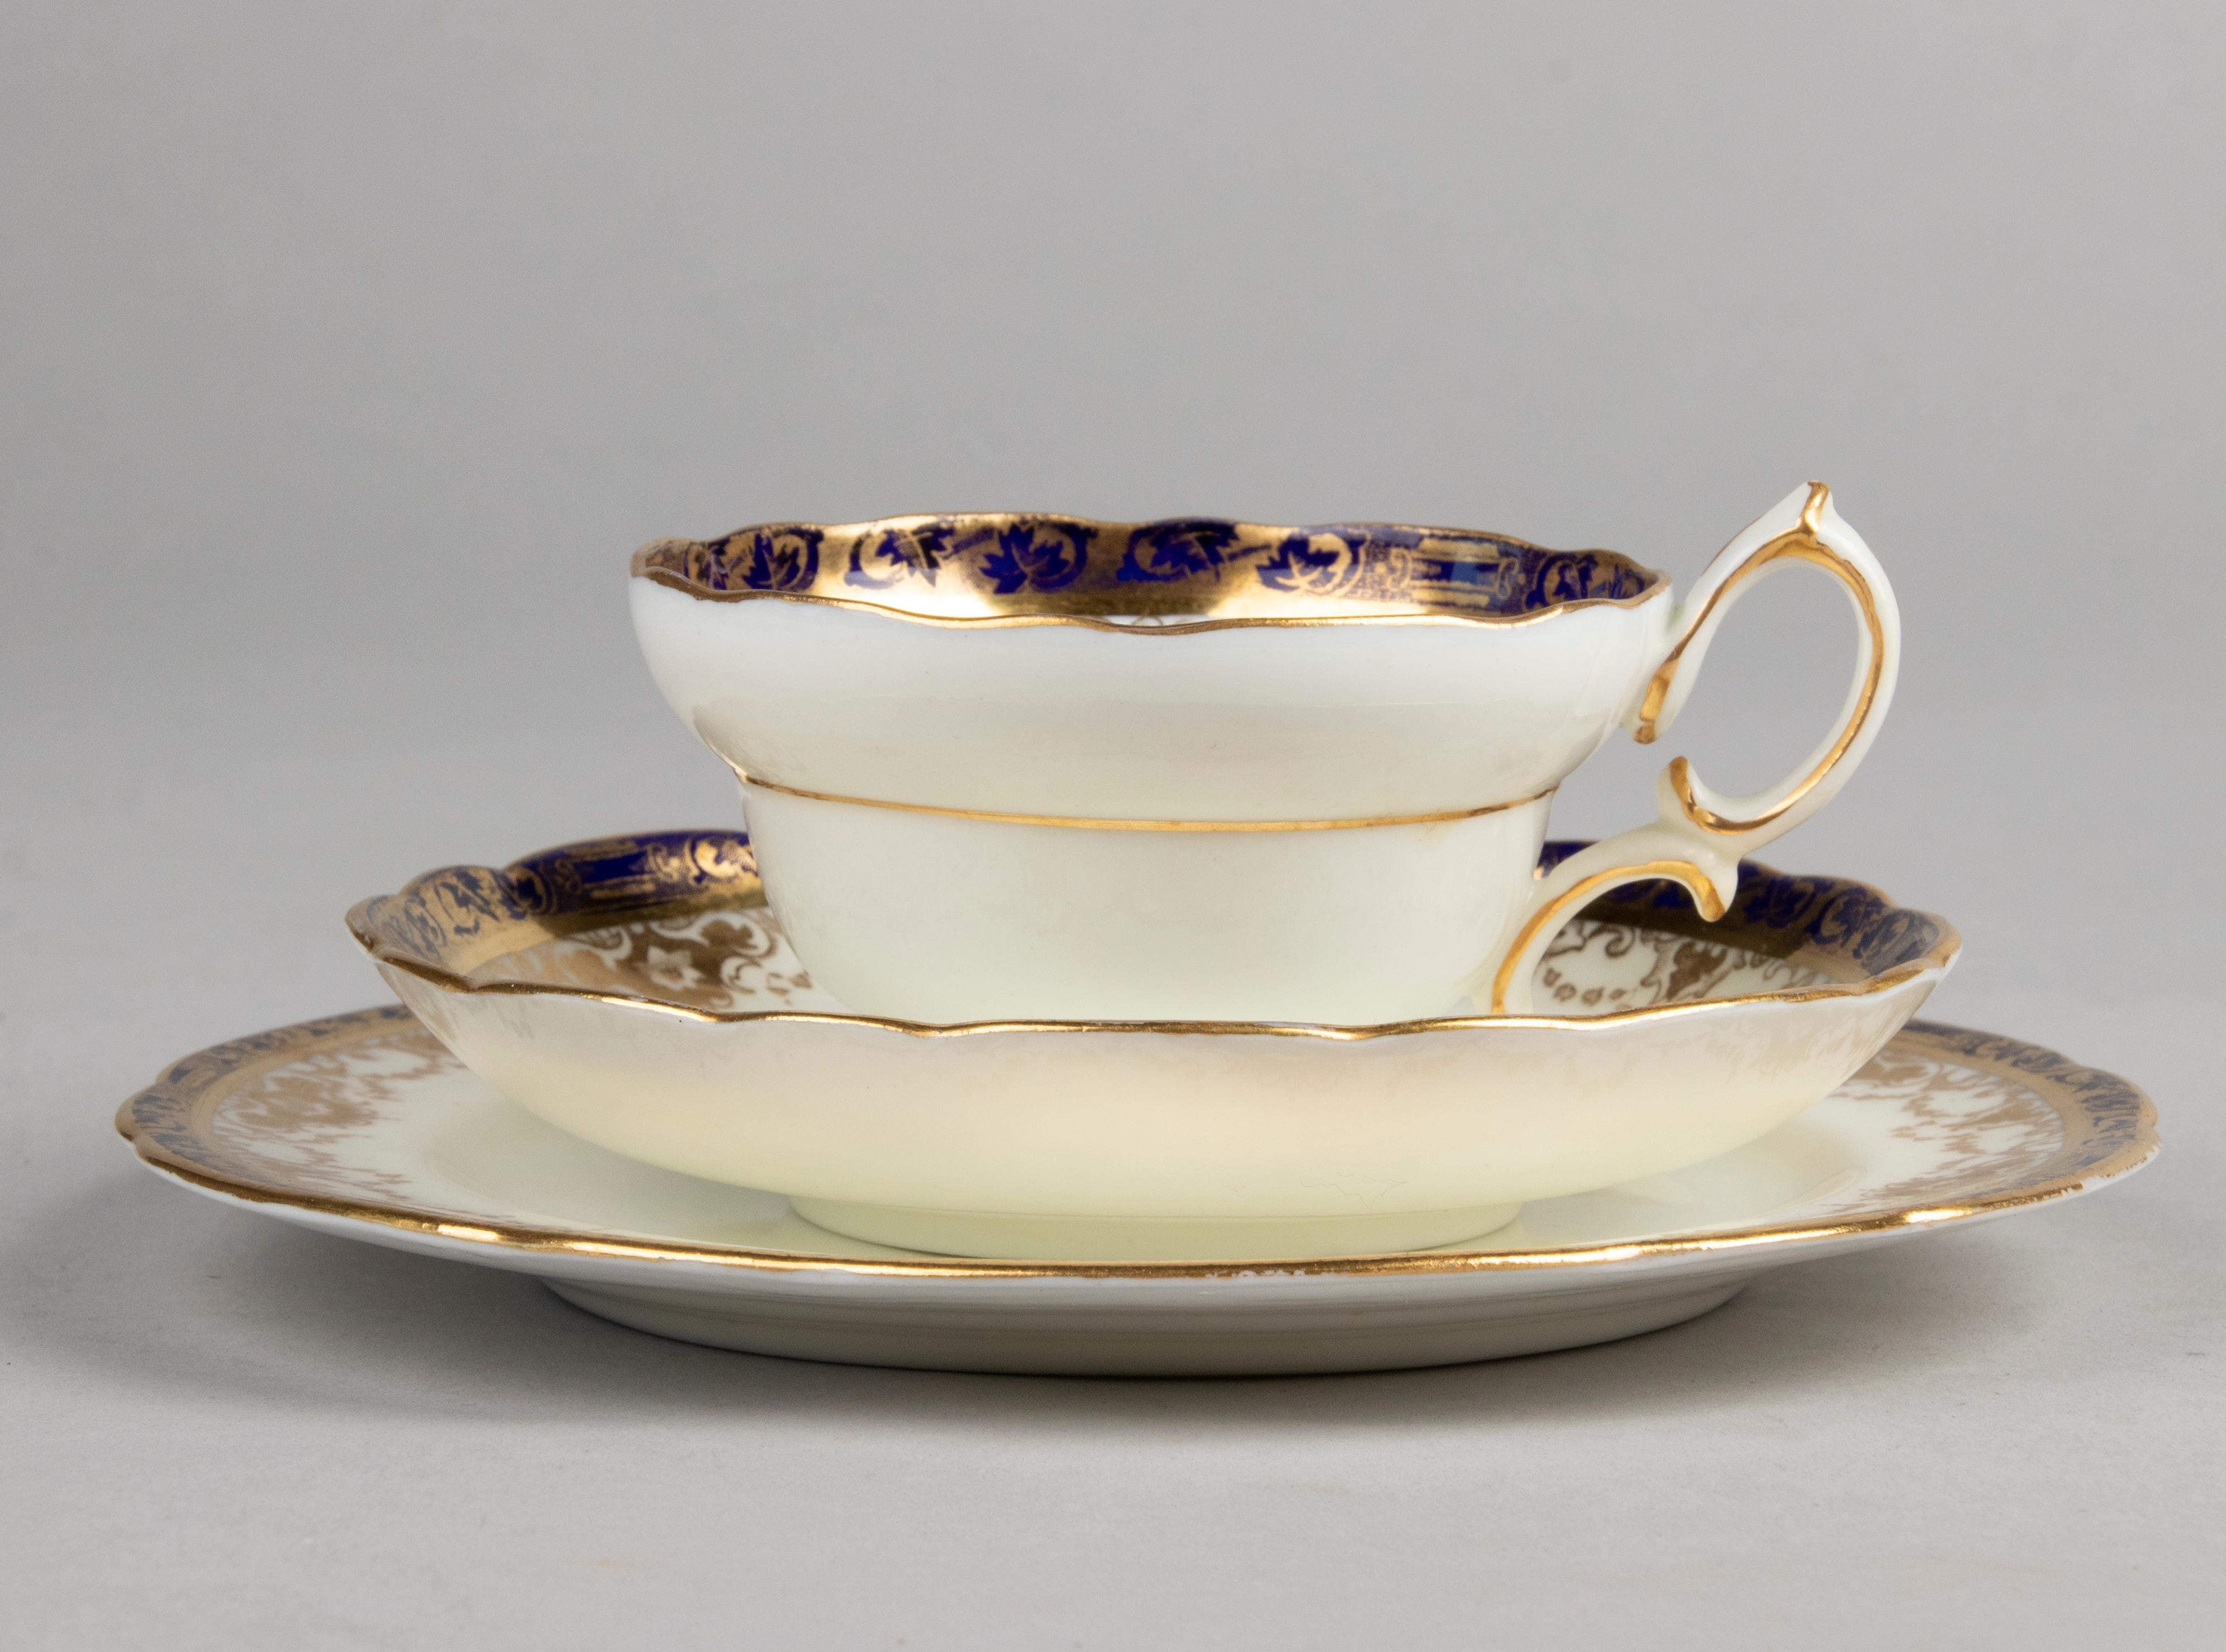 Early 20th Century English Porcelain Tea Set Made by Hammerley 3